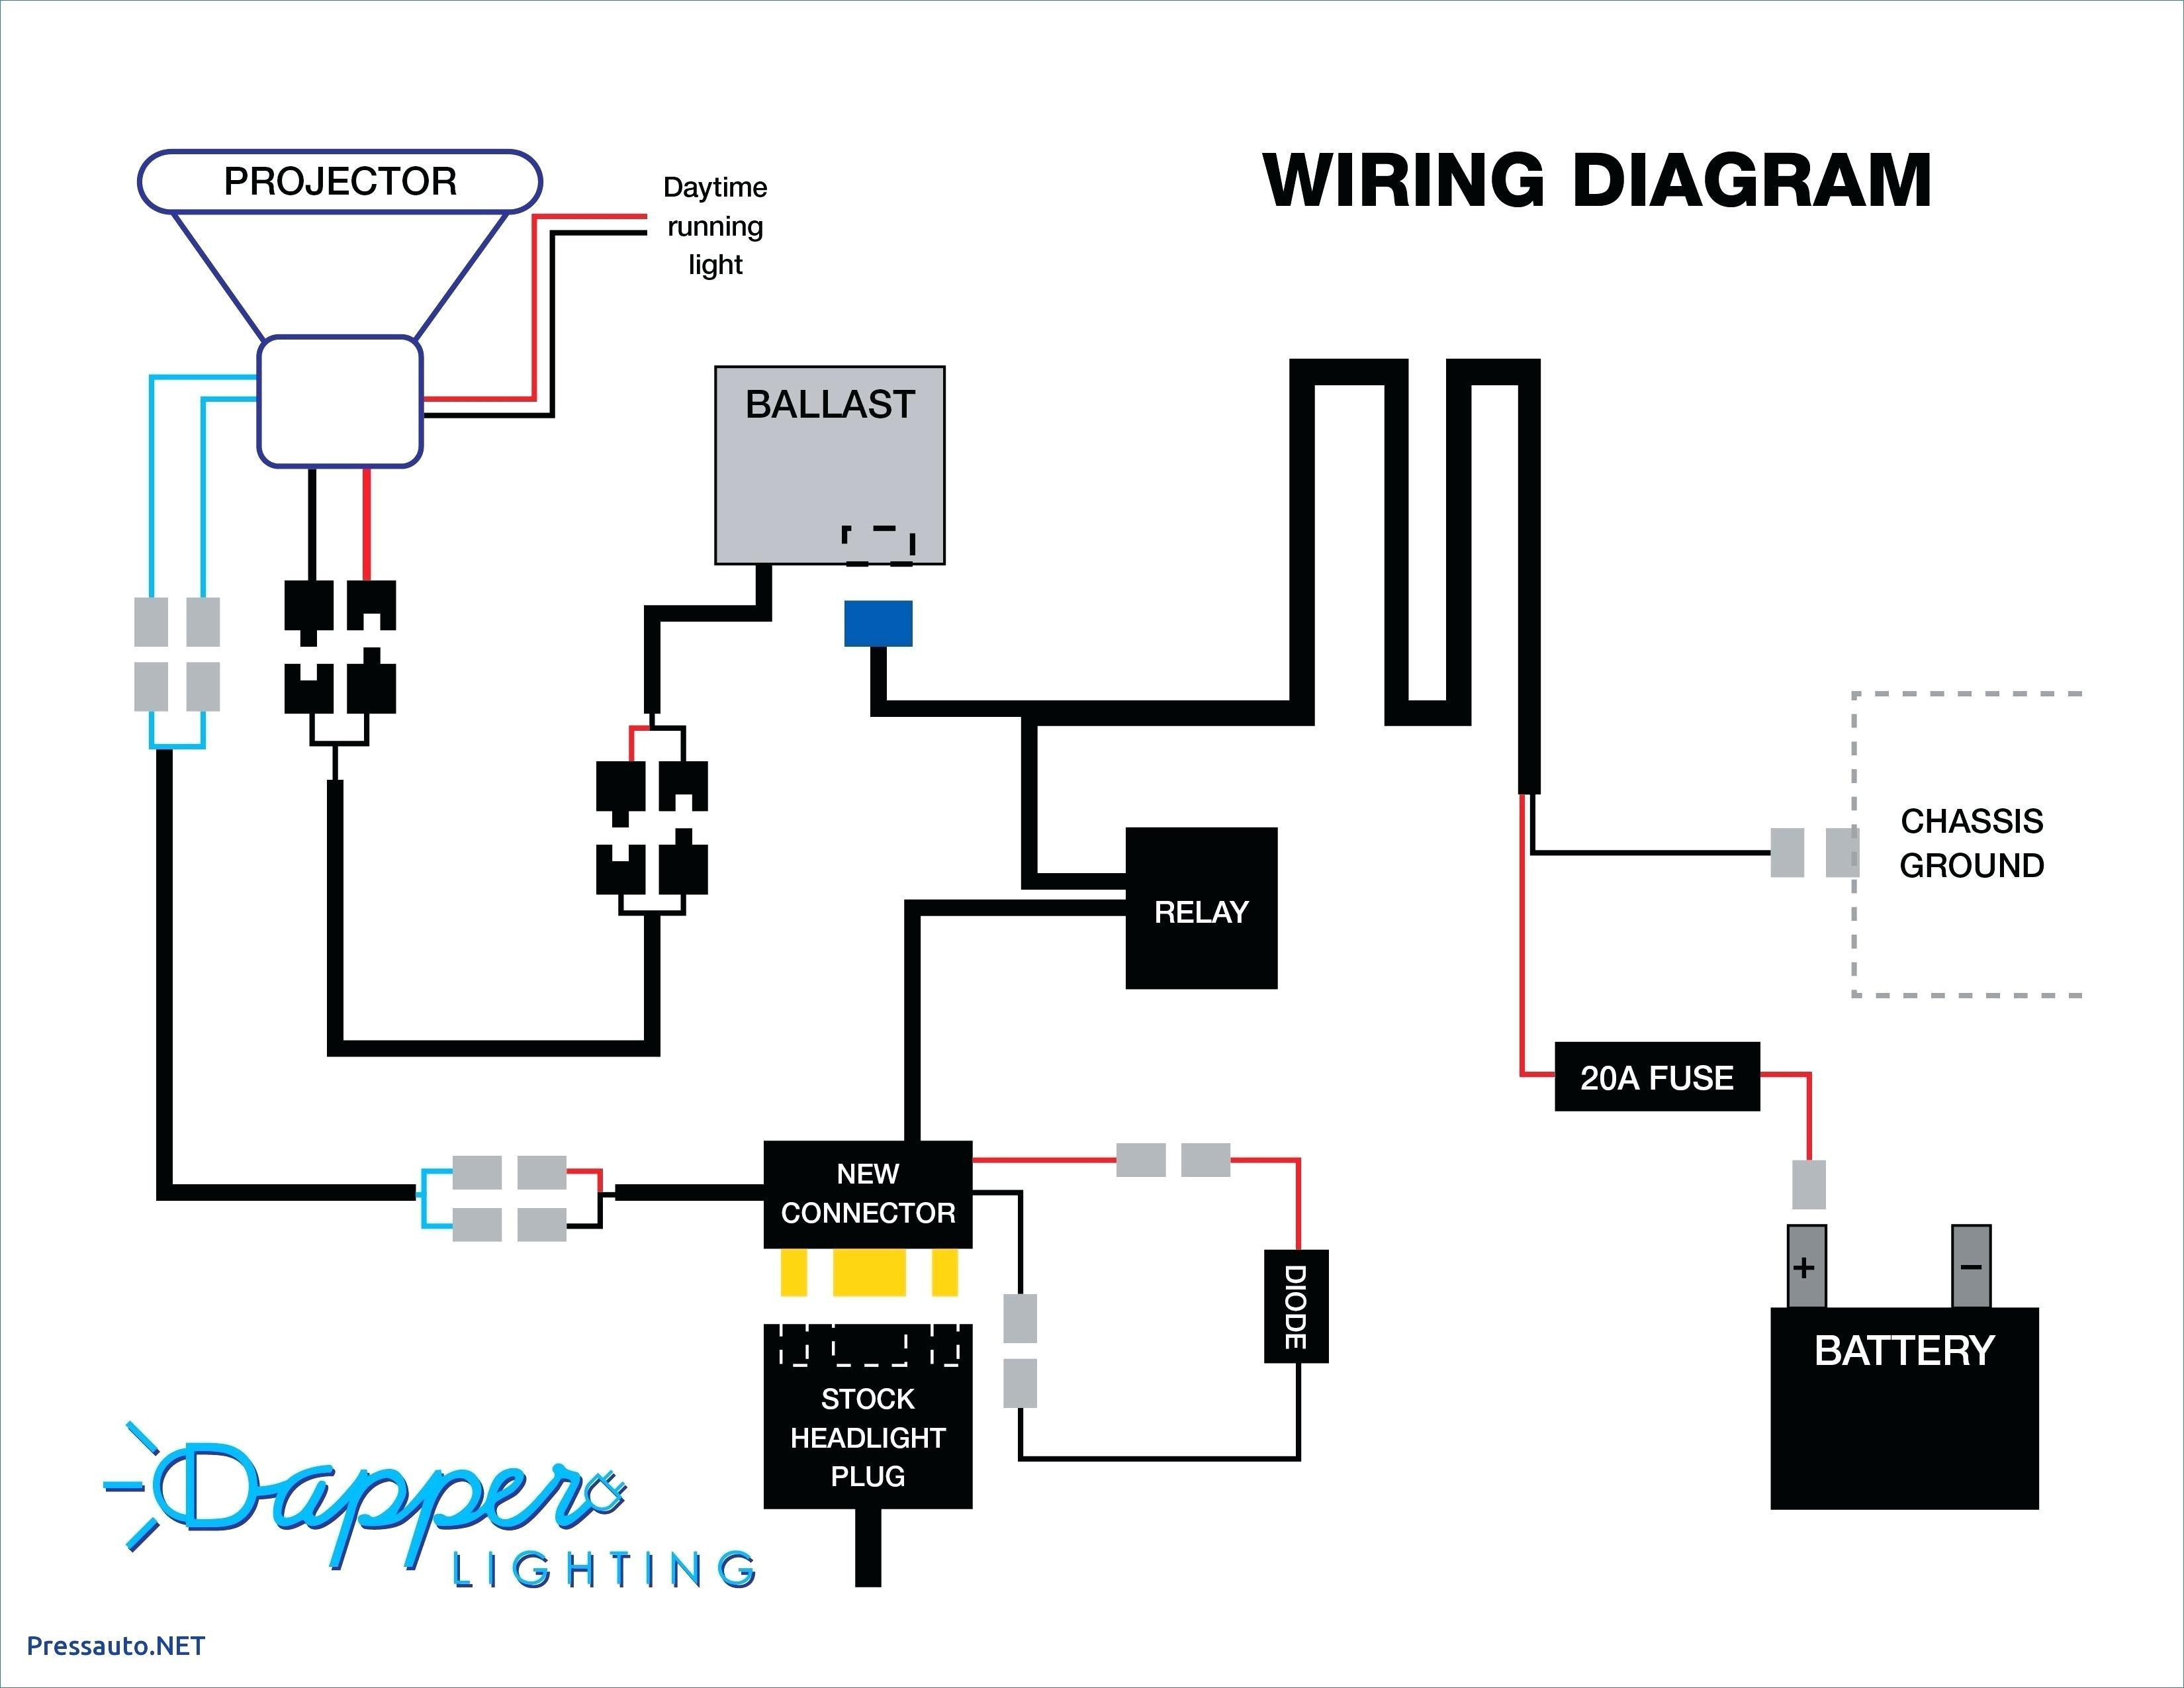 Wiring Diagram For Stock Trailer Best Wiring Diagram For Exiss Horse Trailer Valid Inspirational Horse